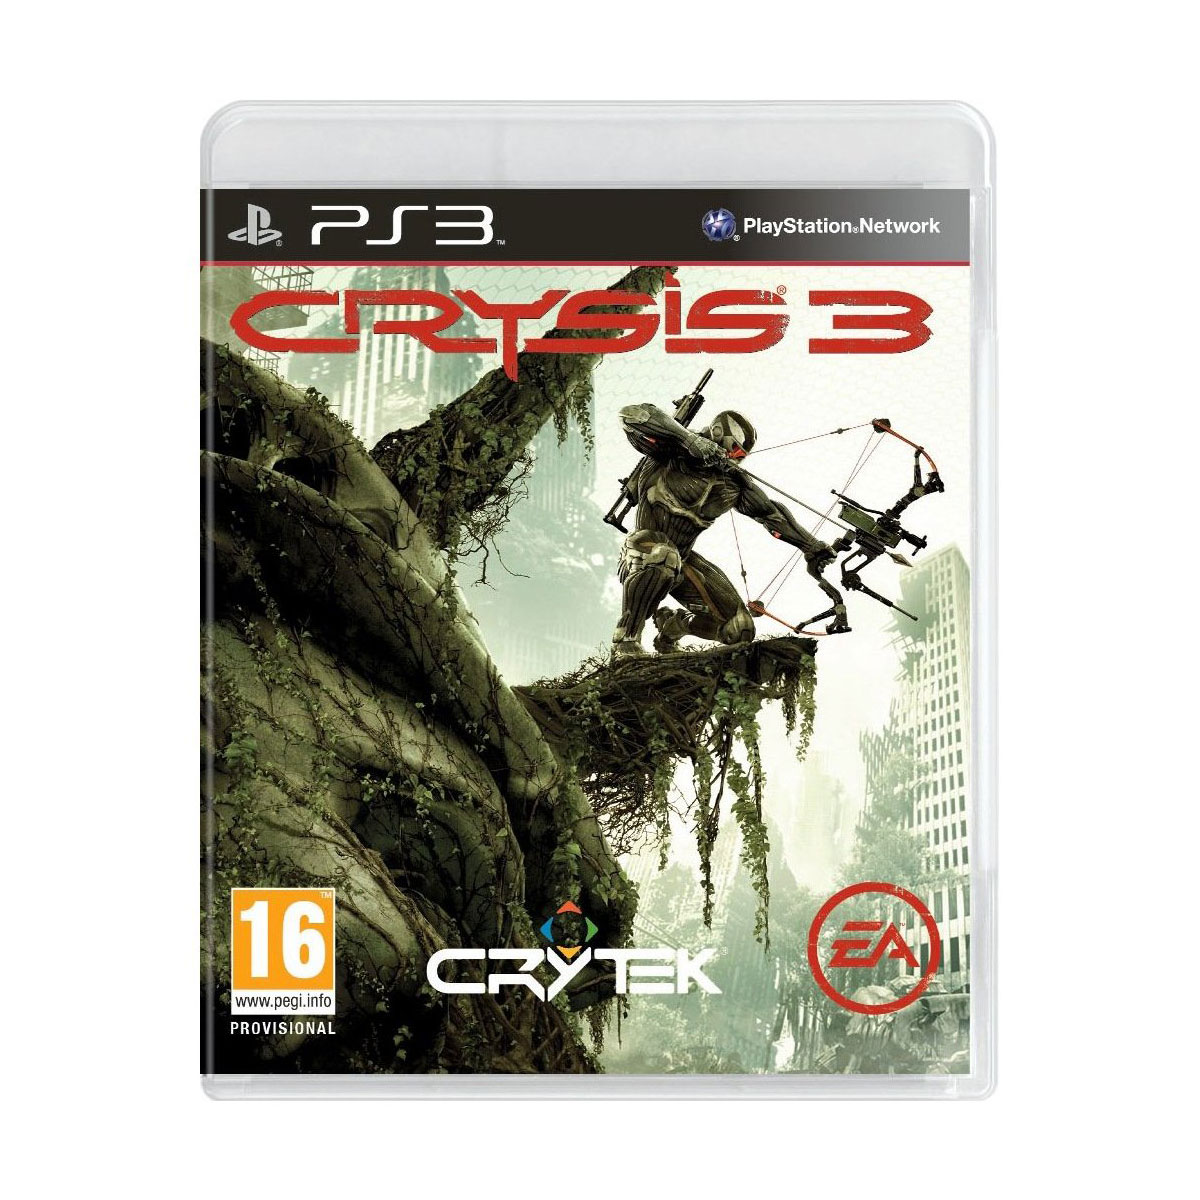 crysis 3 ps3 download